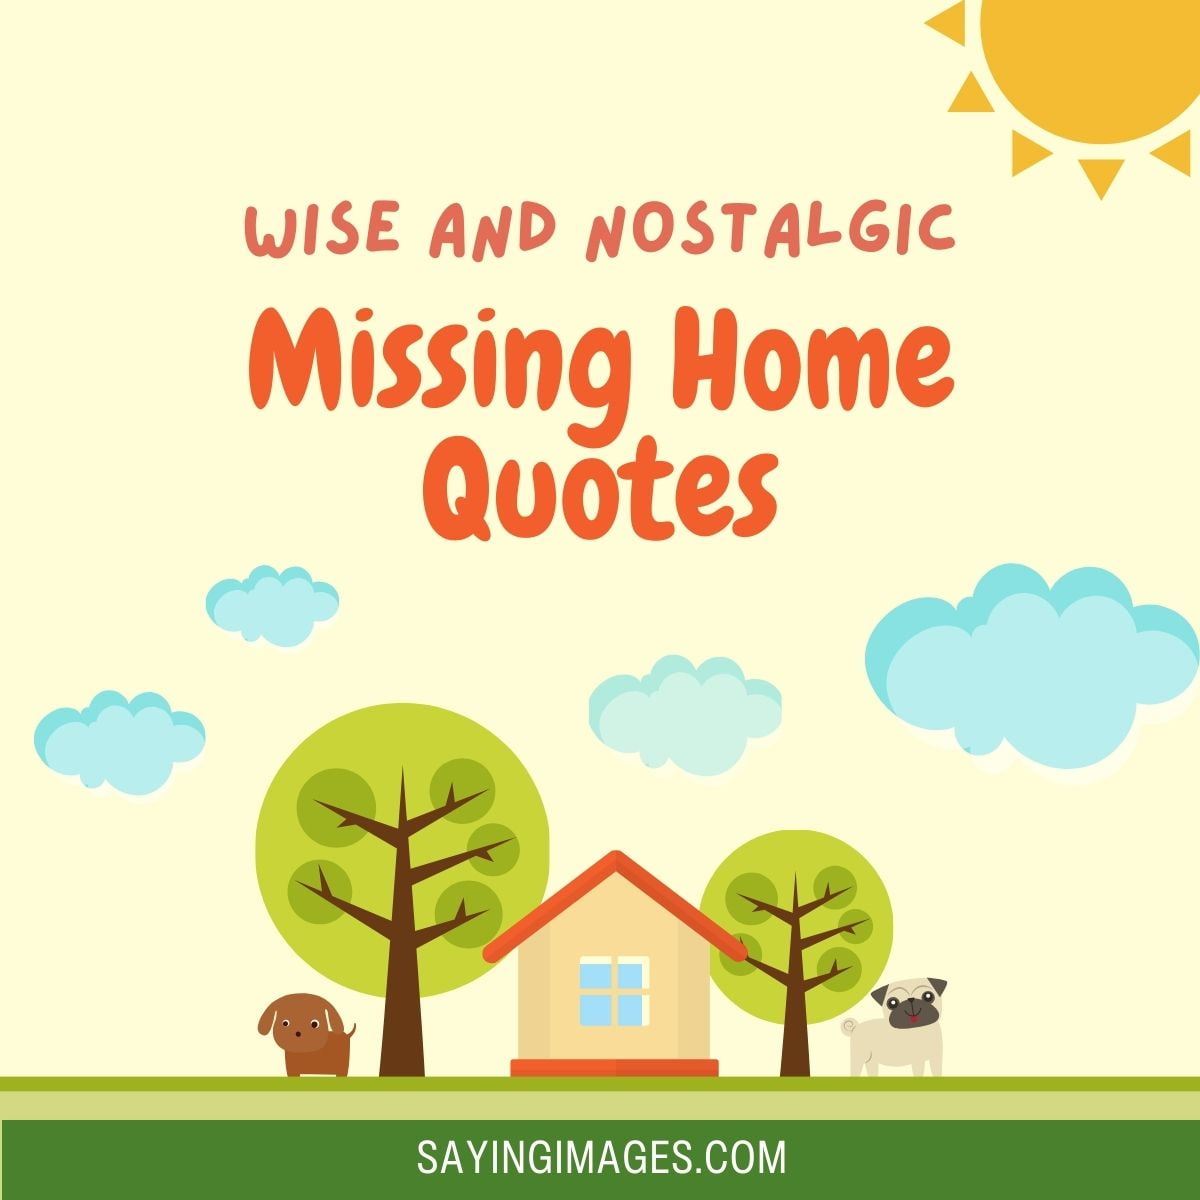 Wise And Nostalgic Quotes About Missing Home